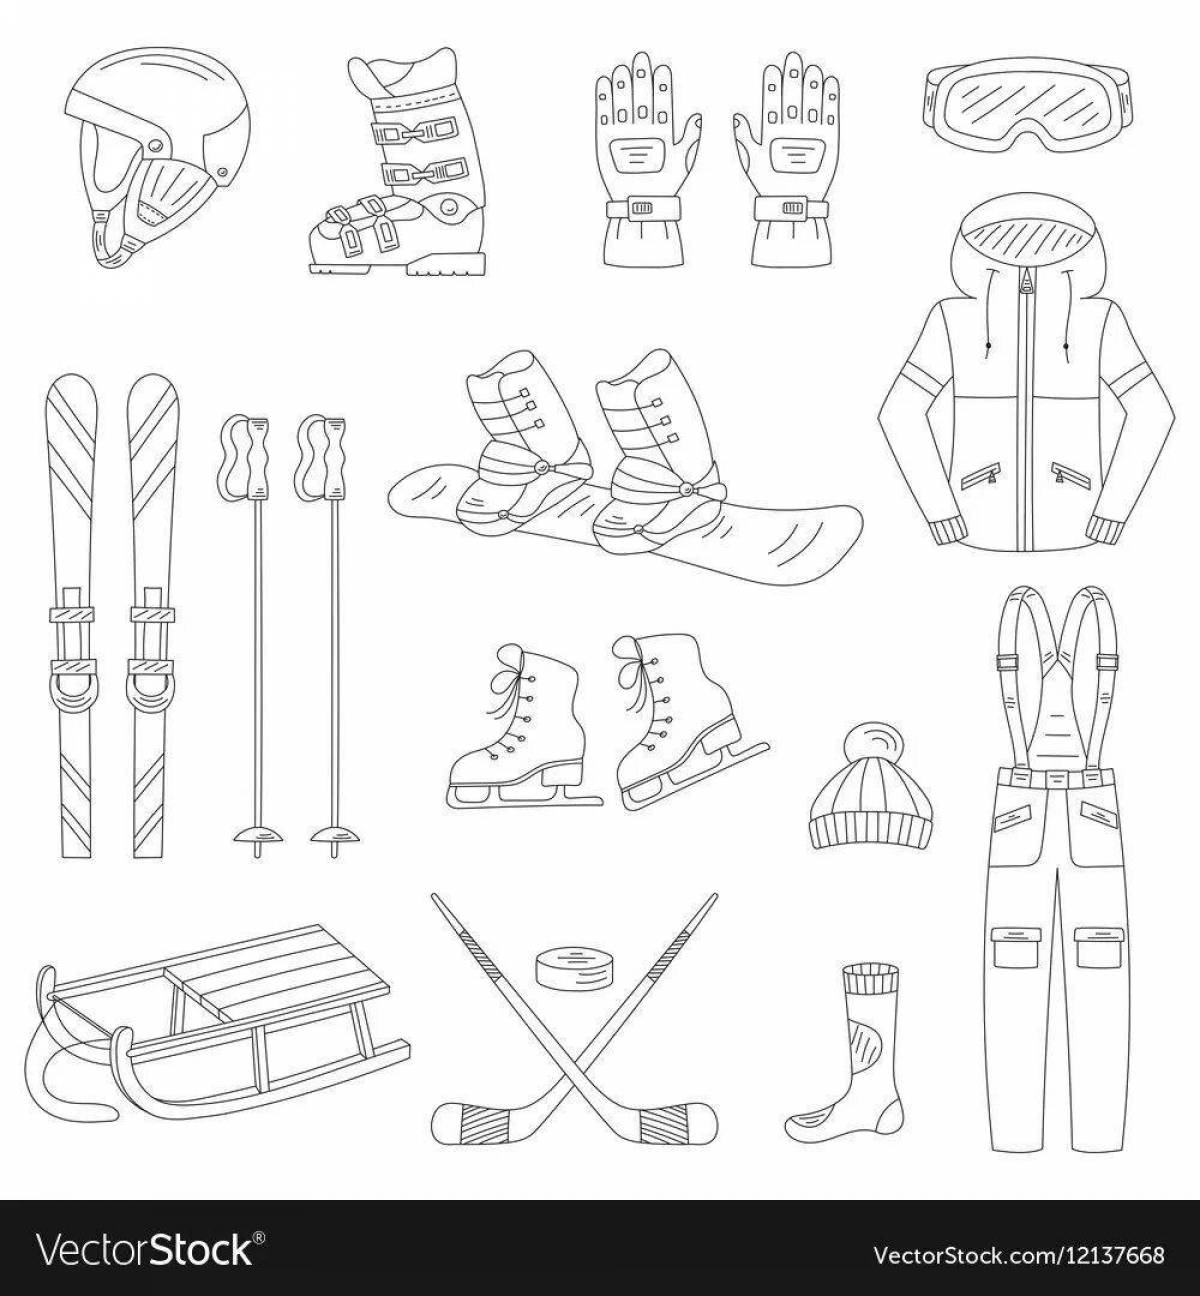 Exciting skis, skates, sleds, coloring book